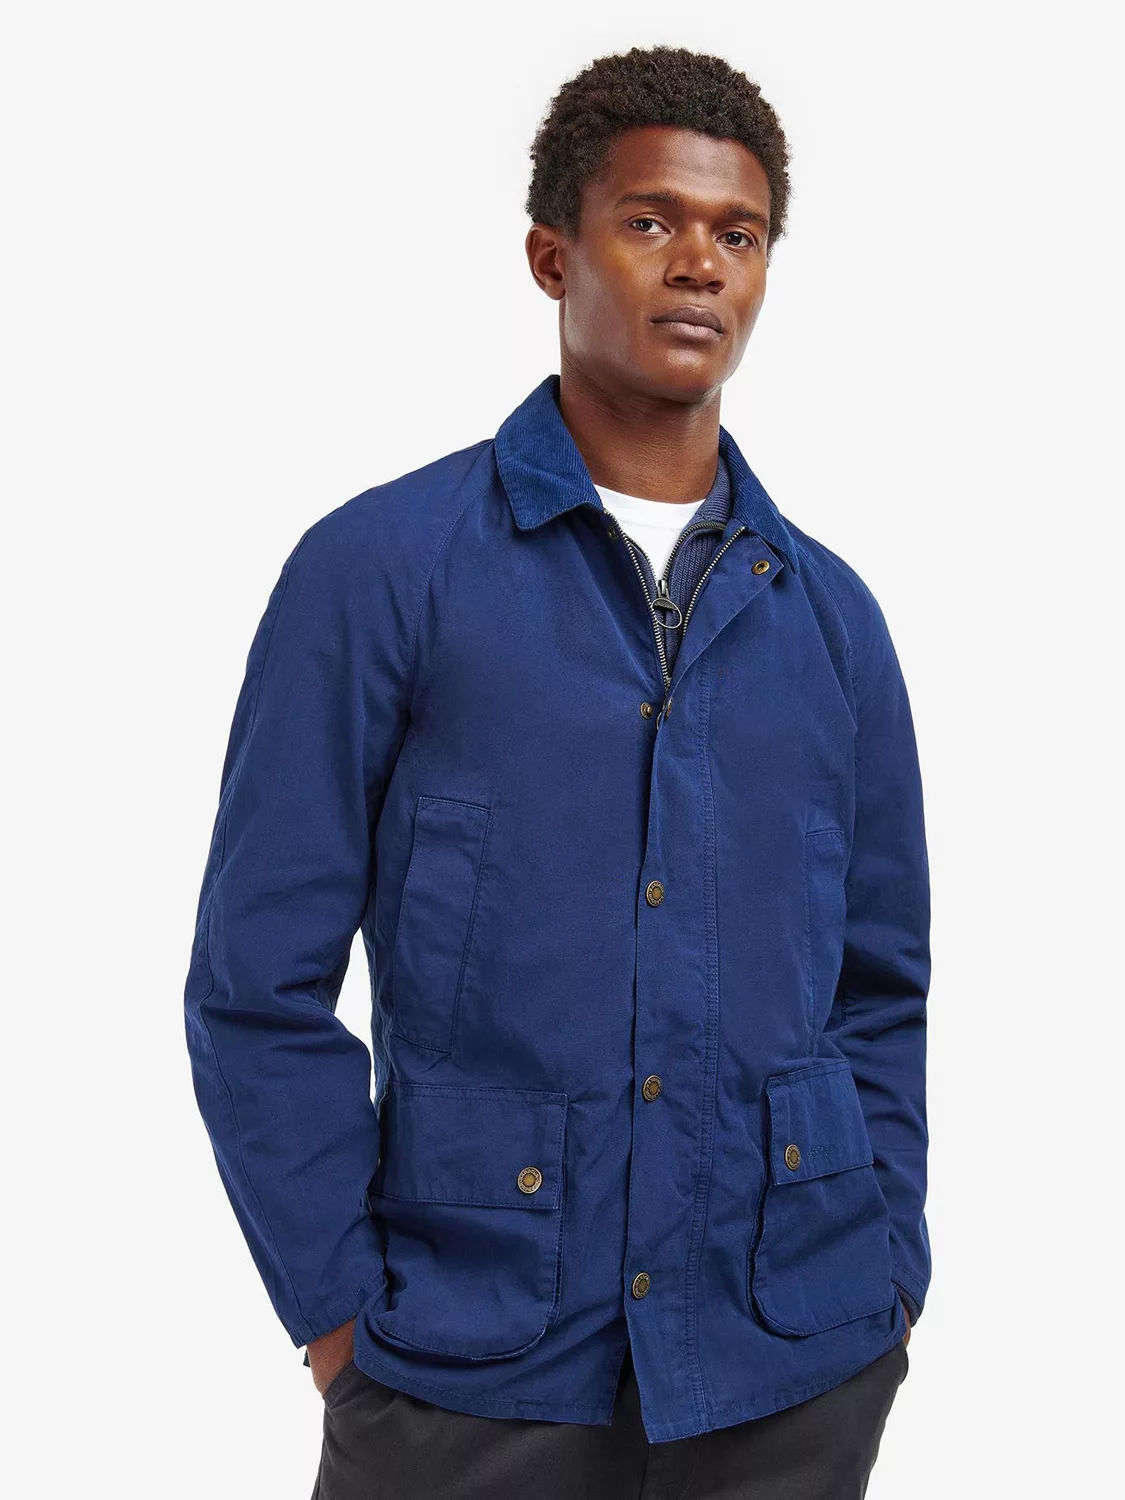 Barbour White Label Slim Beaufort Casual Jacket, Navy | Compare